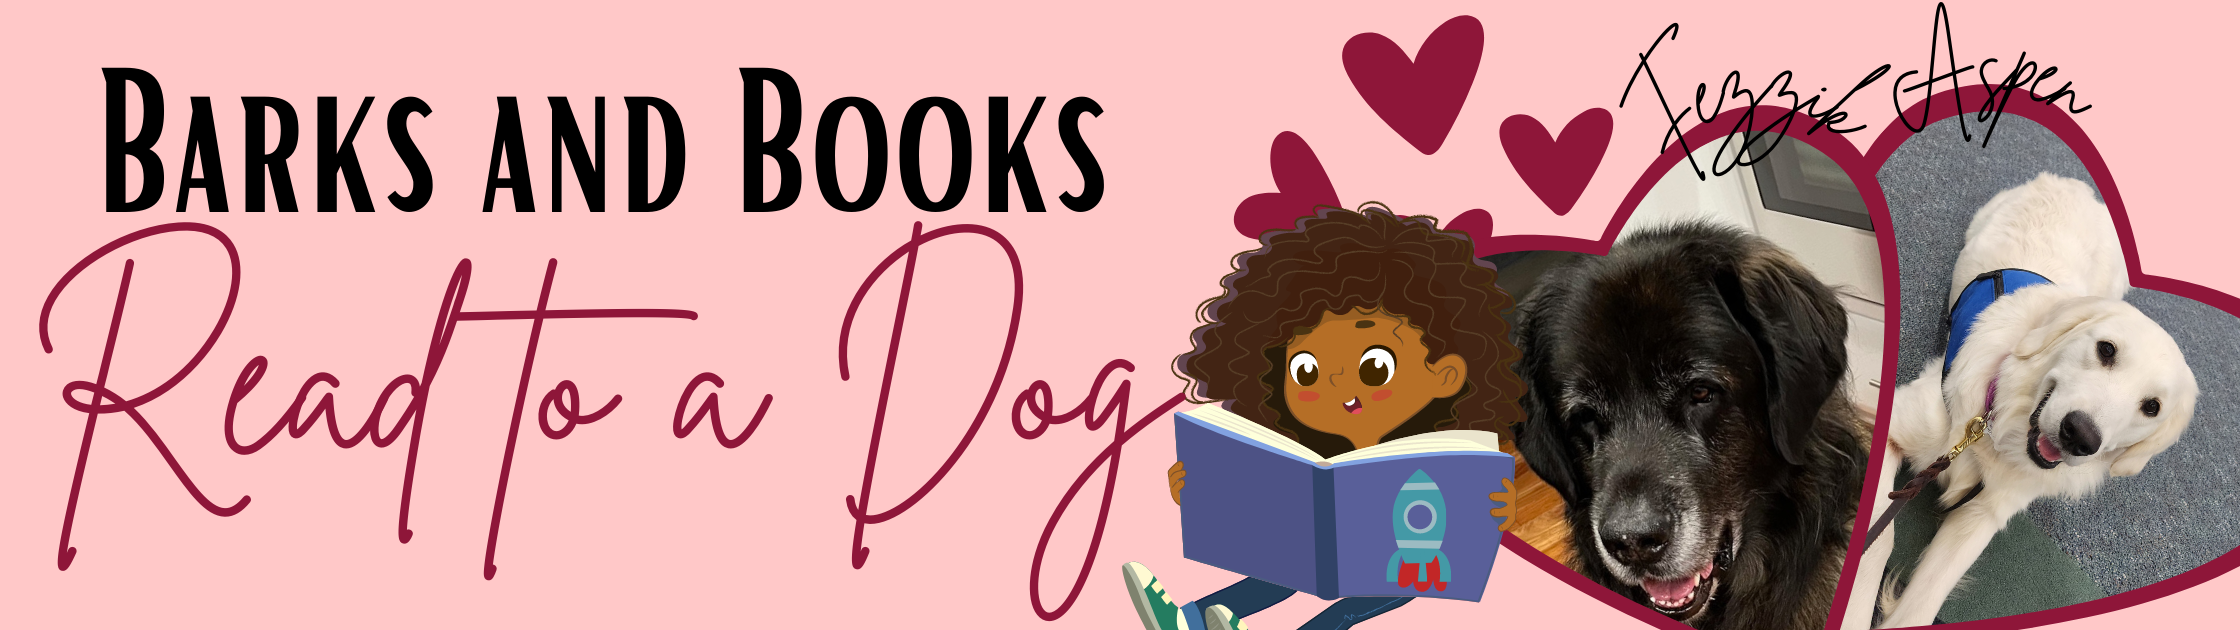 image of girl with curly brown hair and brown skin reading a book next to her is a heart shaped photo of a golden retriever and another heart shaped photo of a Leonberger